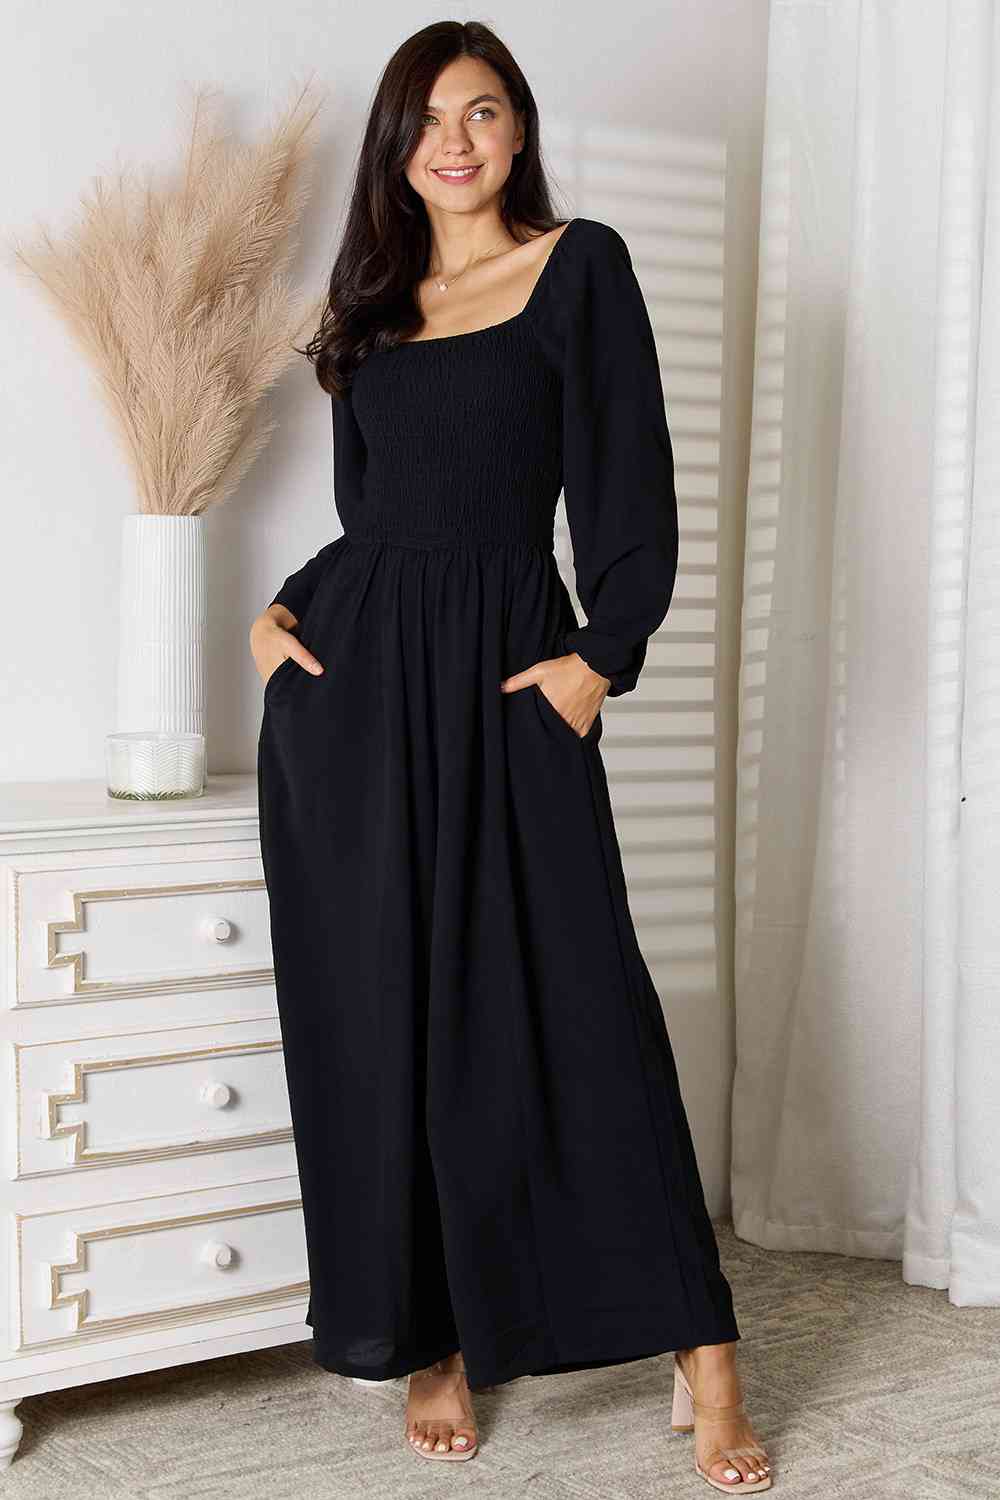 Square Neck Jumpsuit with Pockets - Kawaii Stop - Chic Clothing, Double Take, Fashionable Convenience, Hand Washable Jumpsuit, Luxurious Feel, Opaque Material, Pocketed Jumper, Practical Fashion, Ship from USA, Smocked Design, Square Neck Jumpsuit, Stylish One-Piece, Trendy Jumpsuit, Versatile Outfit, Women's Apparel